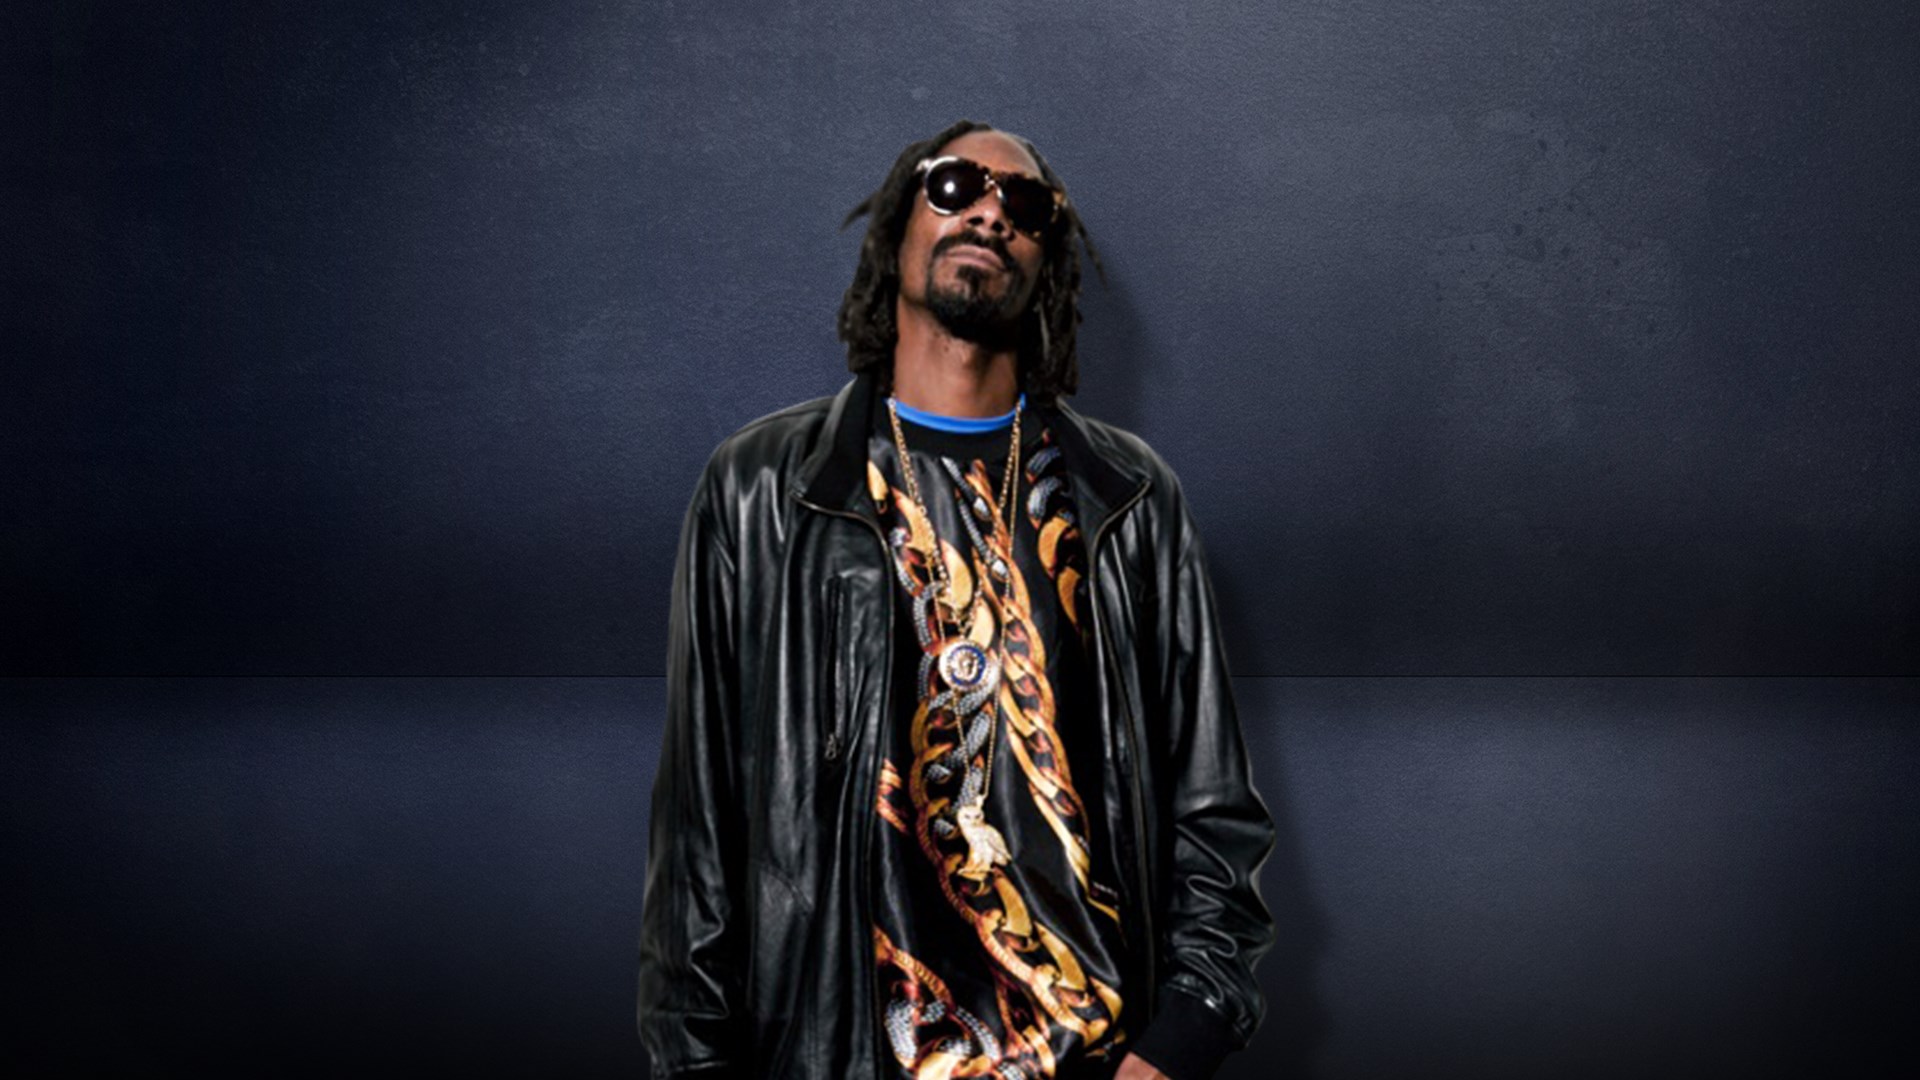 Call of Duty: Ghosts - Snoop Dogg Voice Pack DLC Steam CD Key 6.44 $